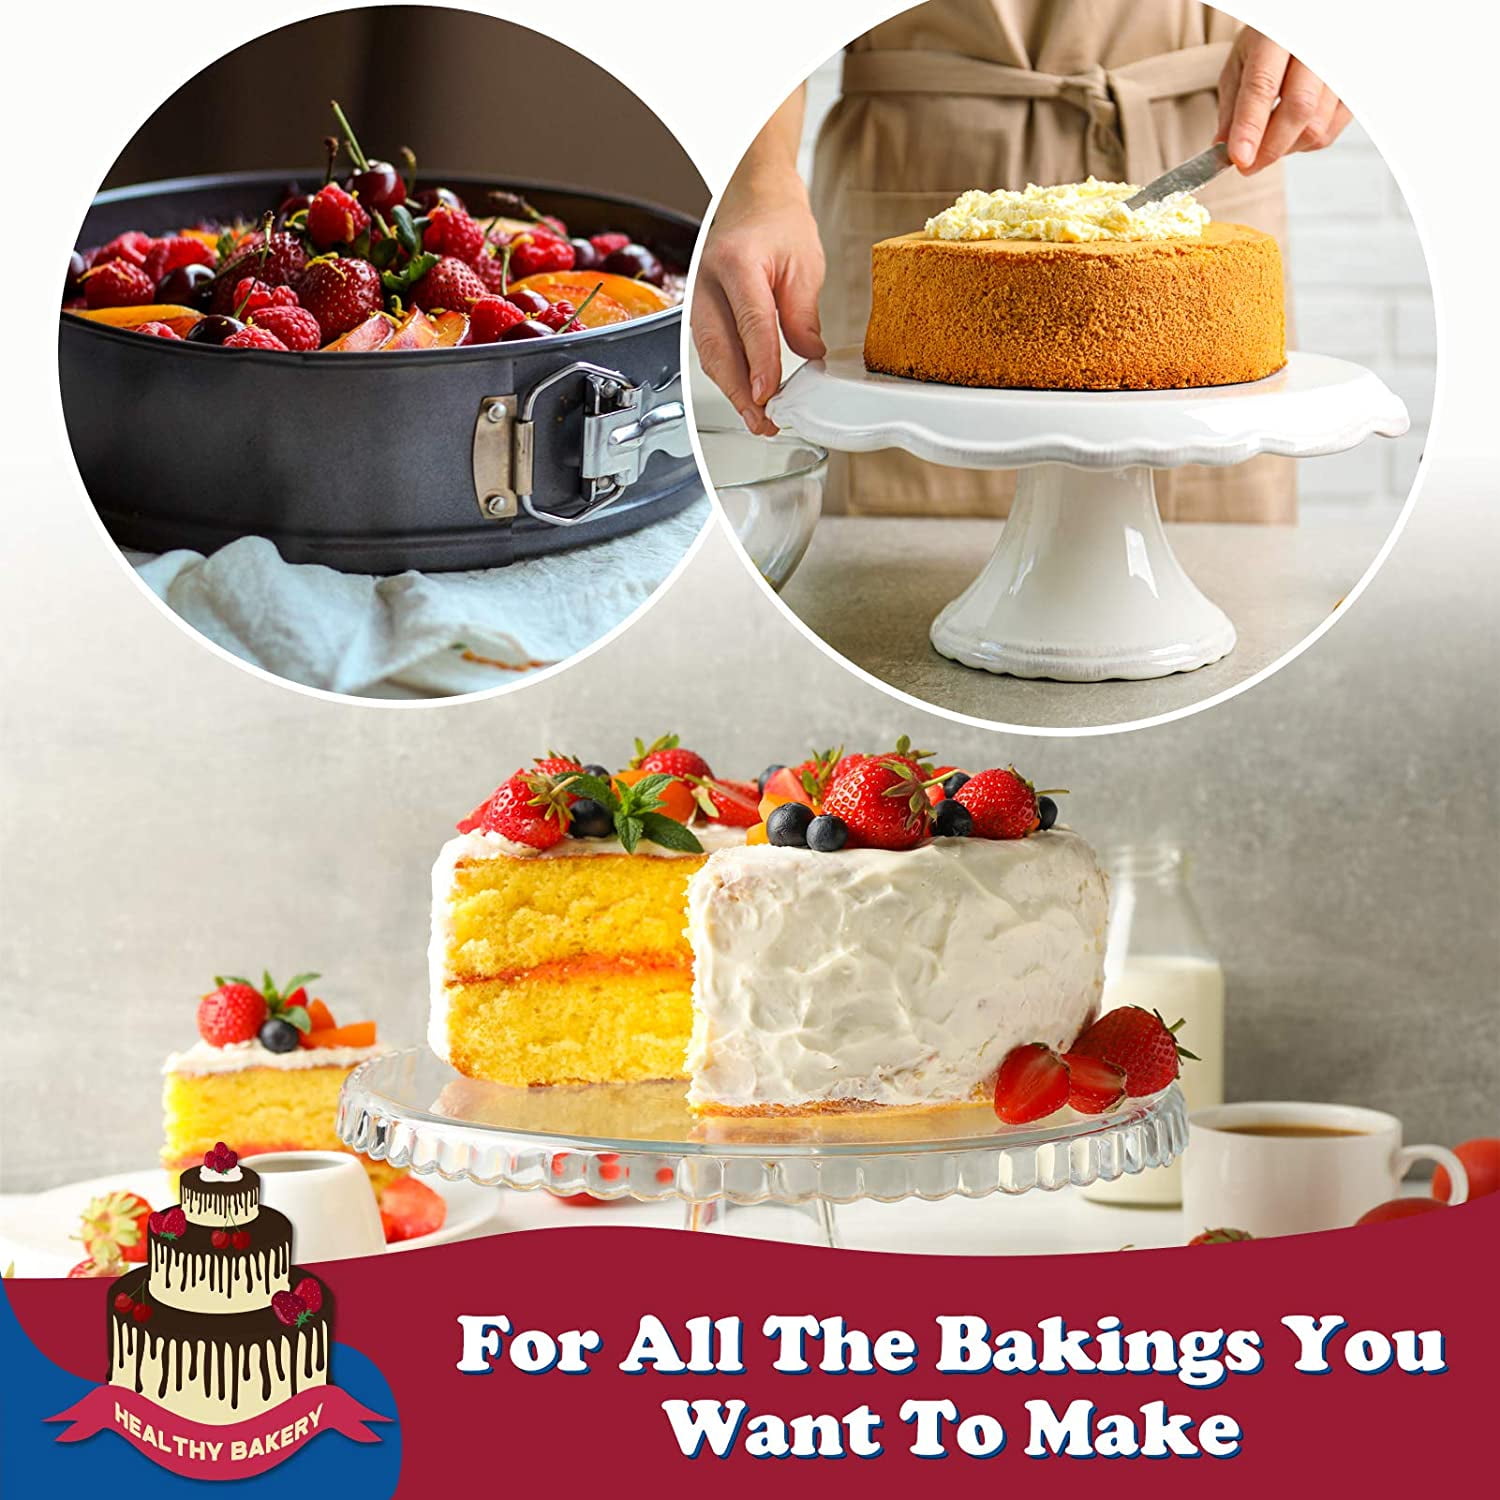 Tasty 10 Springform and Cheesecake Pan Non-Stick - Set of 2